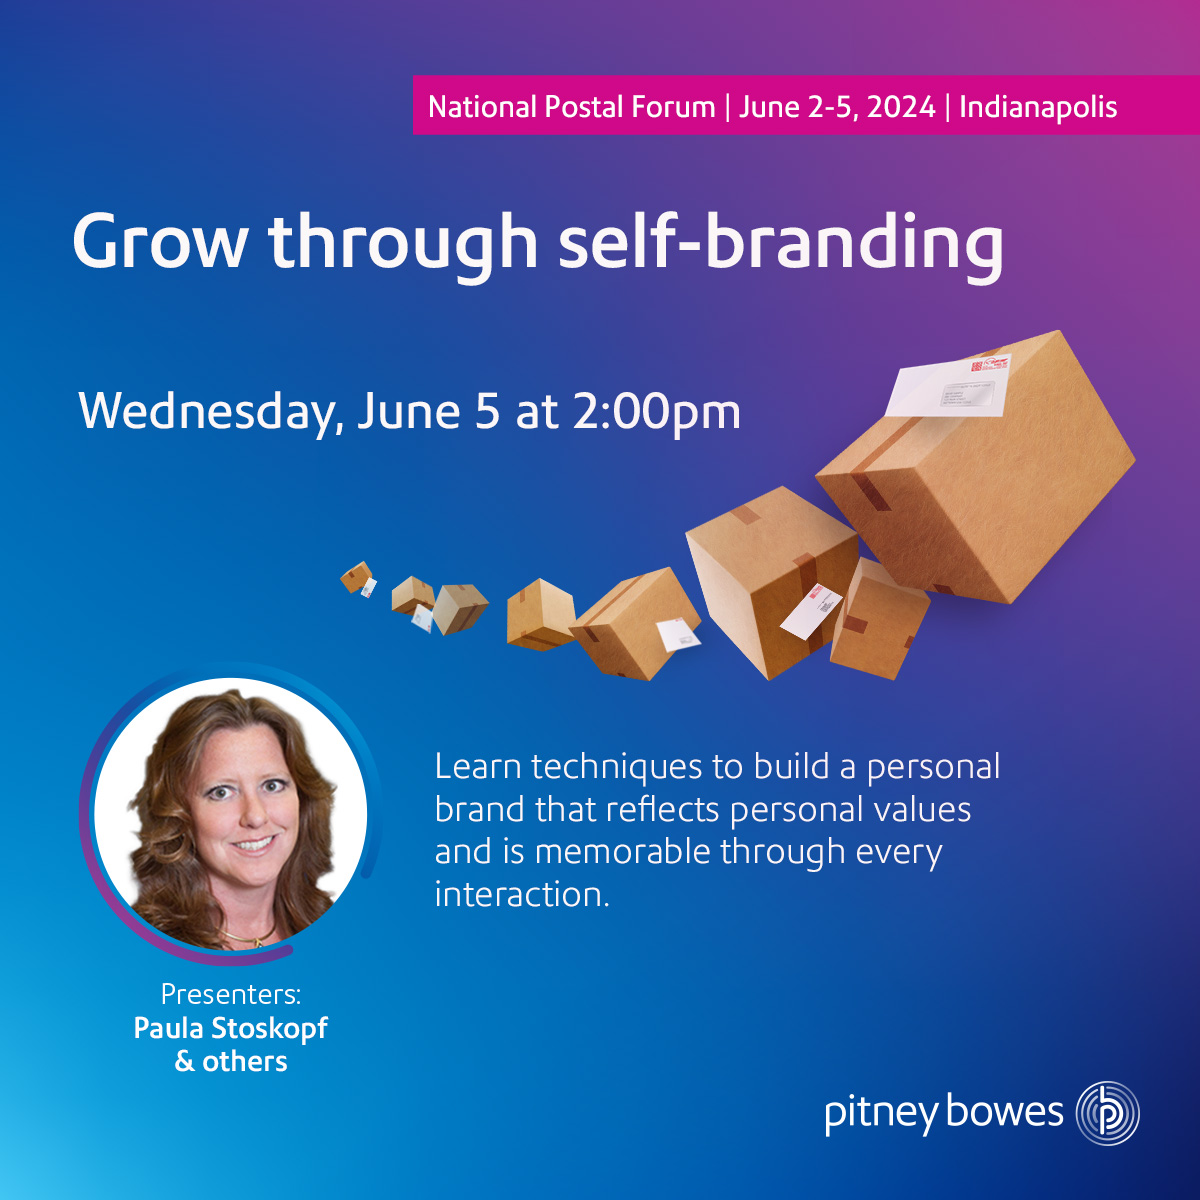 Unlock your potential. Join us June 5, 2 PM to master self-branding with Paula Stoskopf. Build a personal brand that truly represents you. Learn more: spr.ly/6015eBCLP #mail #npf #npf2024 #nationalpostalforum @postalforum